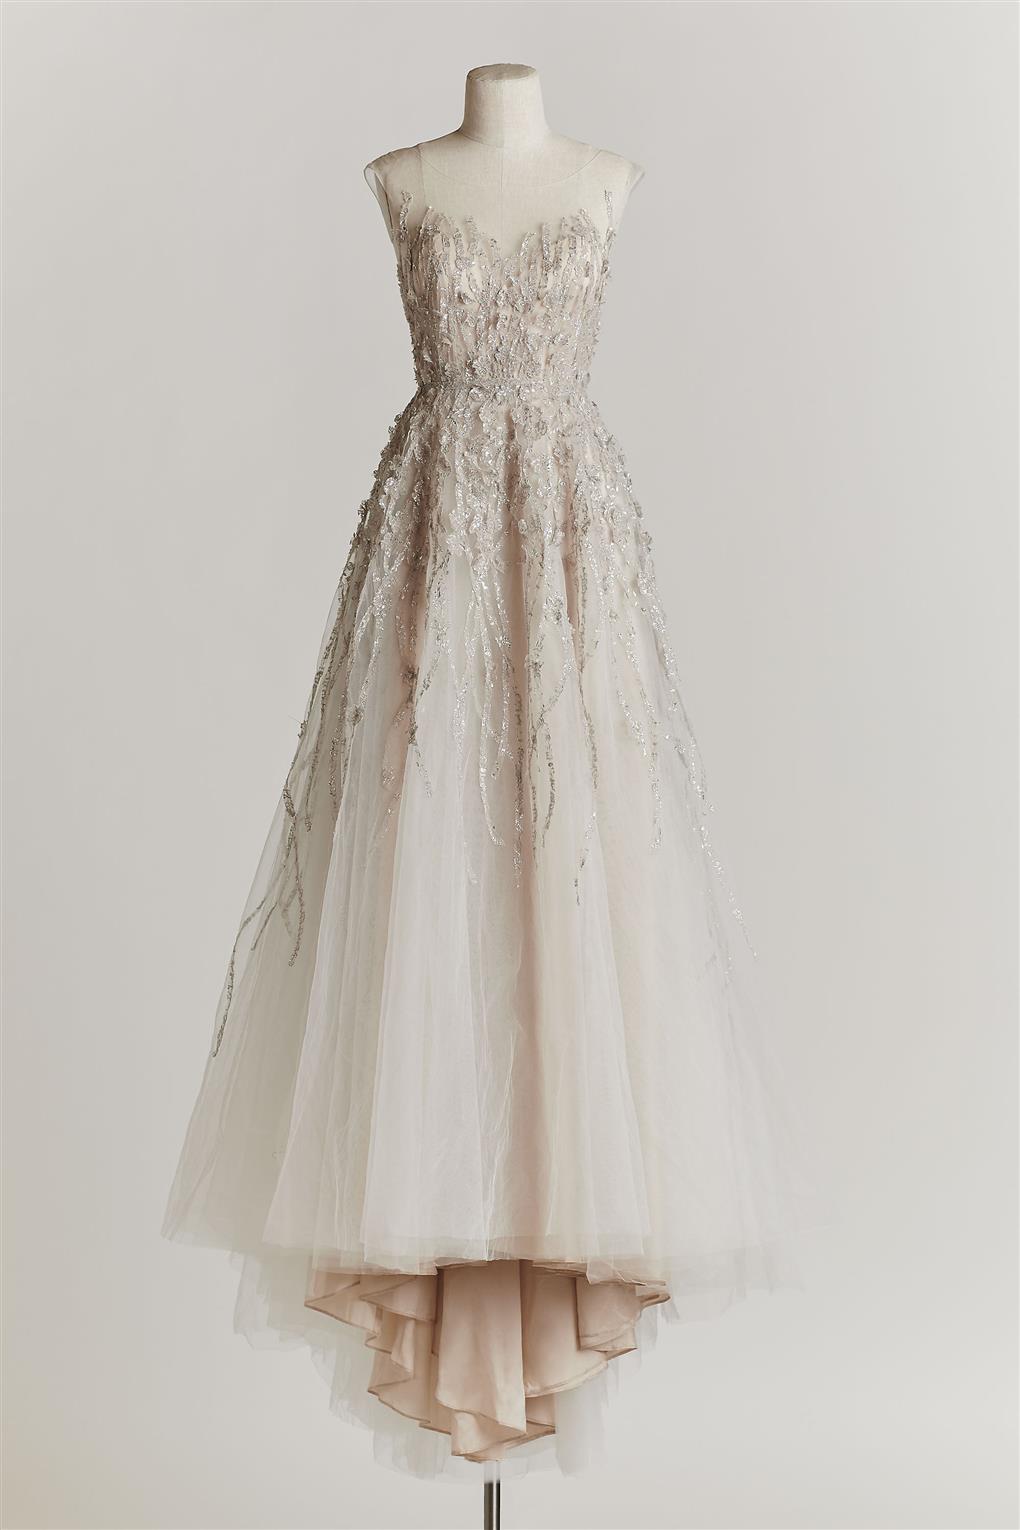 New Years Eve Wedding Dress - Wisteria from BHLDN's Spring 2015 Bridal Collection